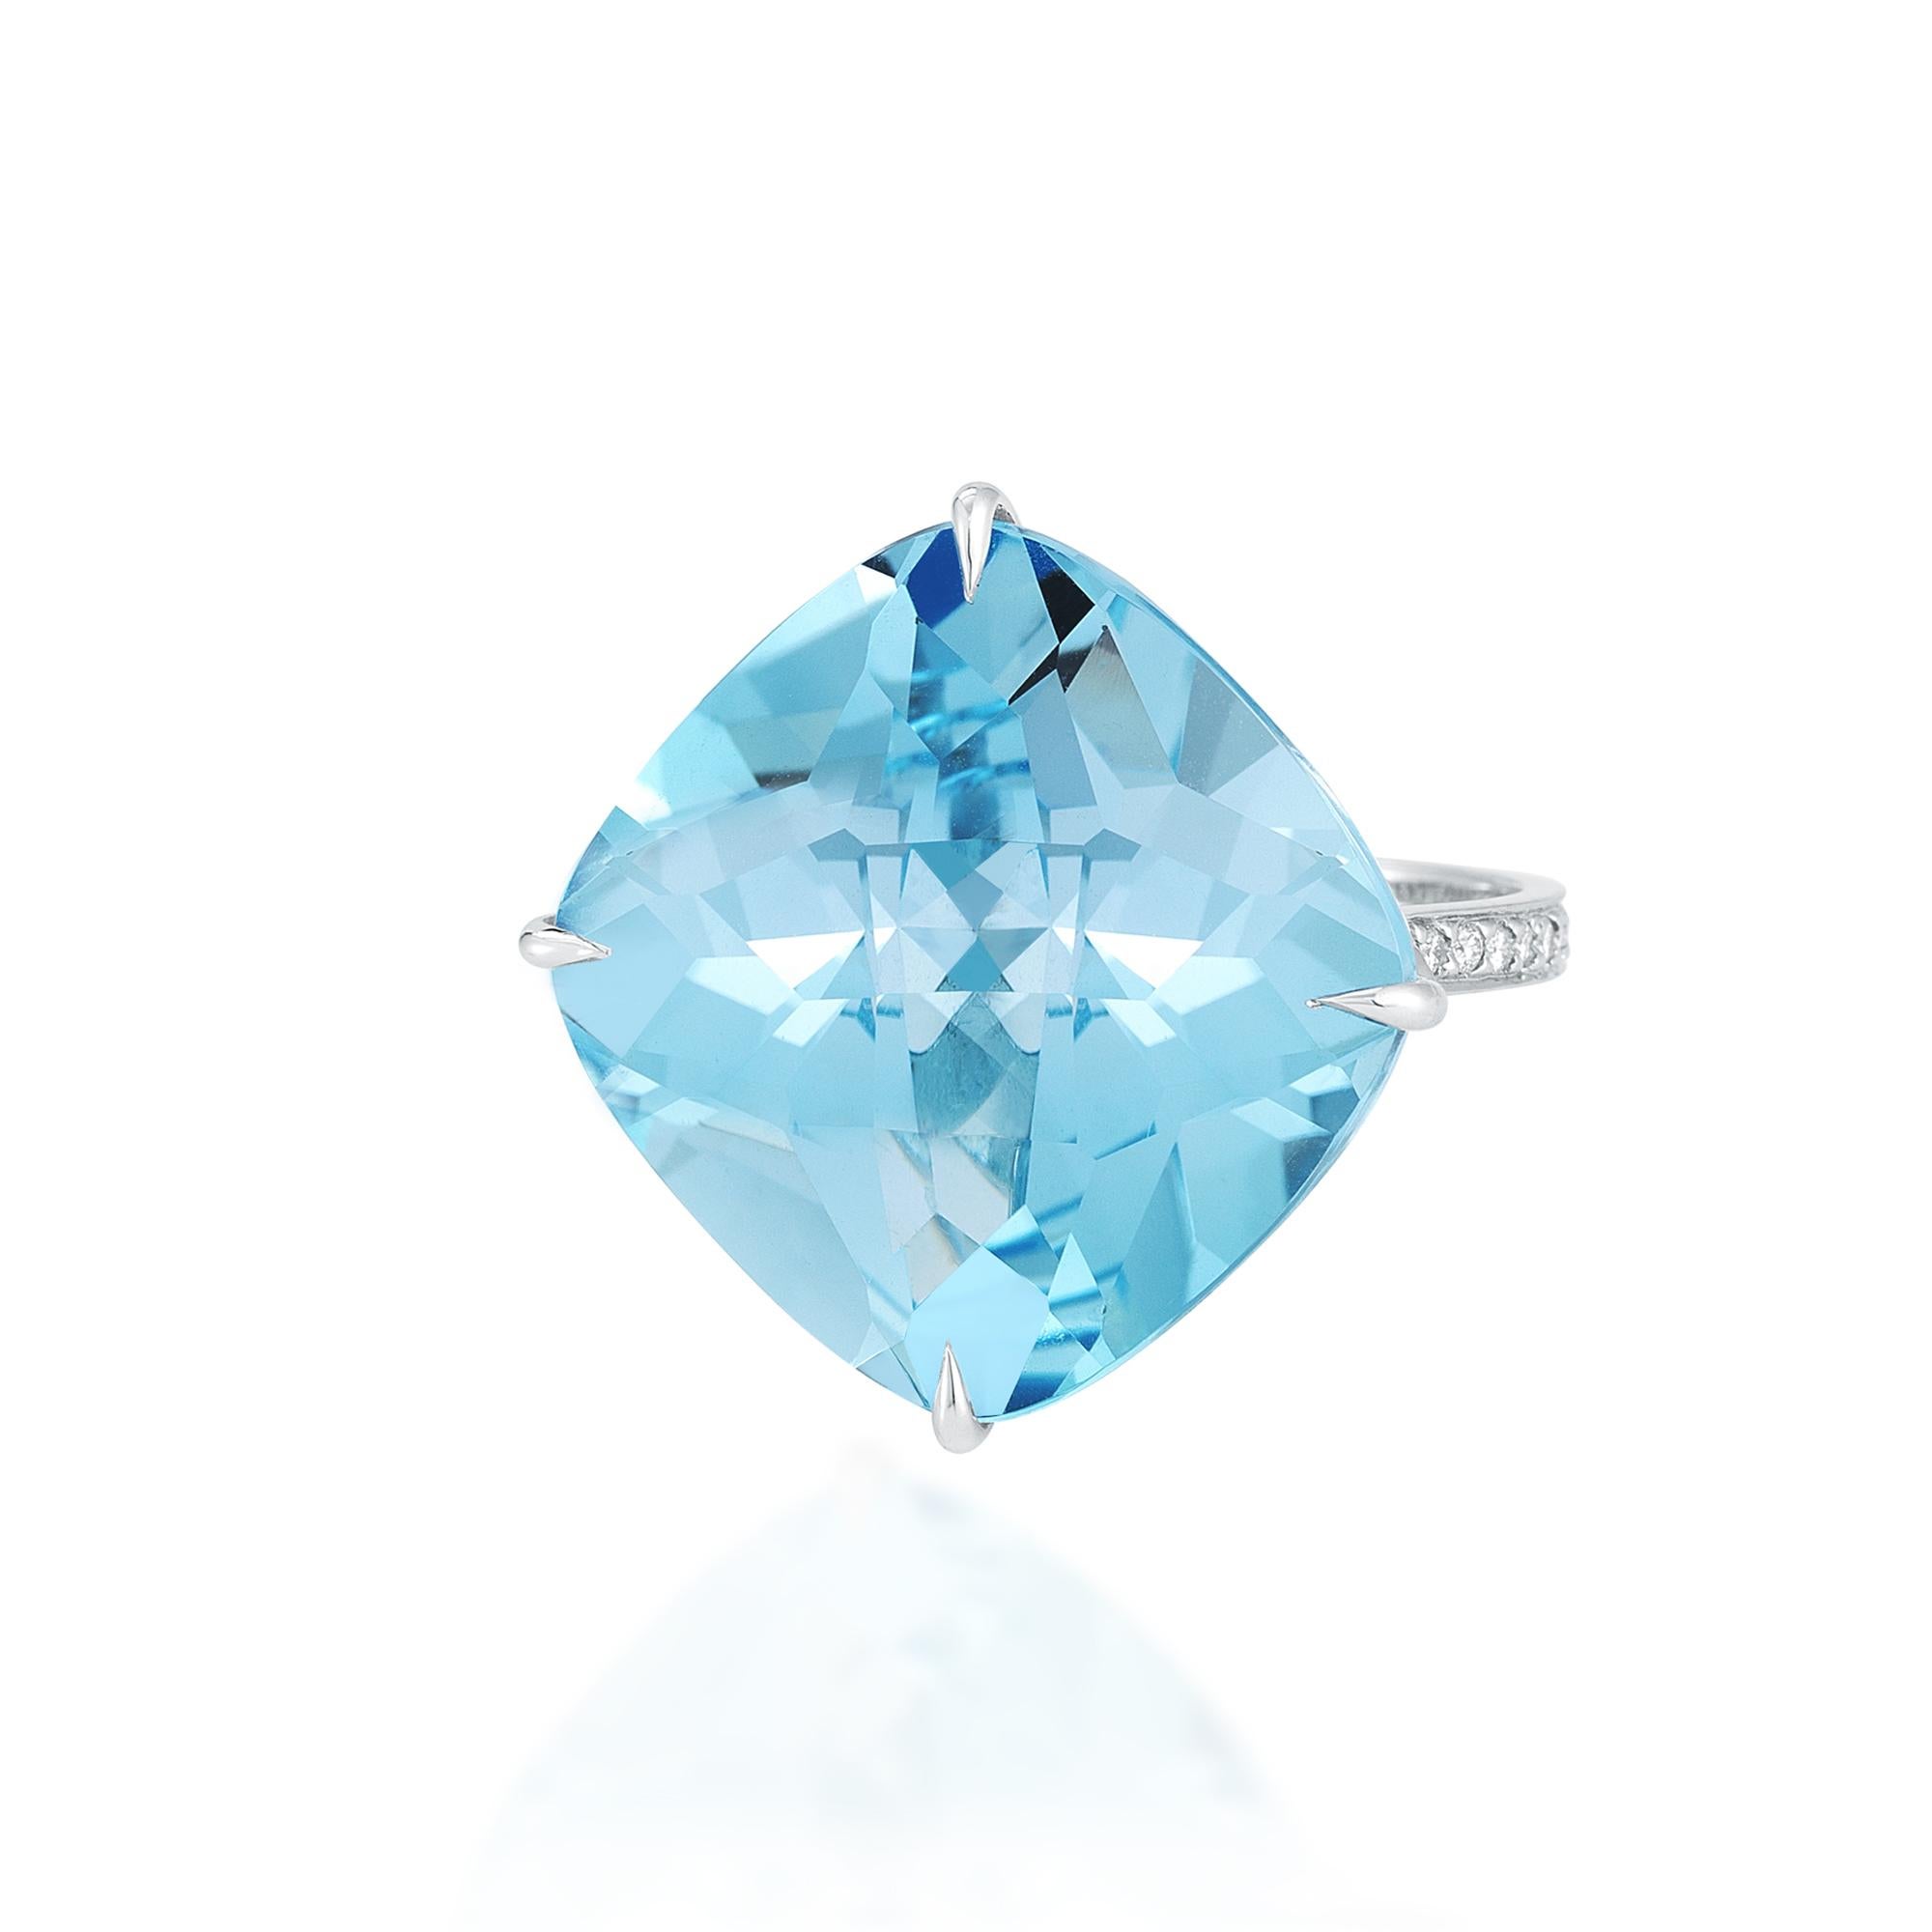 'By the Pool' ring features a square blue topaz with pave-set round, brilliant diamonds set in 18 karat white gold. 

Blue Topaz (20mm): 33.5 carats
Diamonds: 0.15 carats (D-G color, VS clarity) 

SU BT 20 